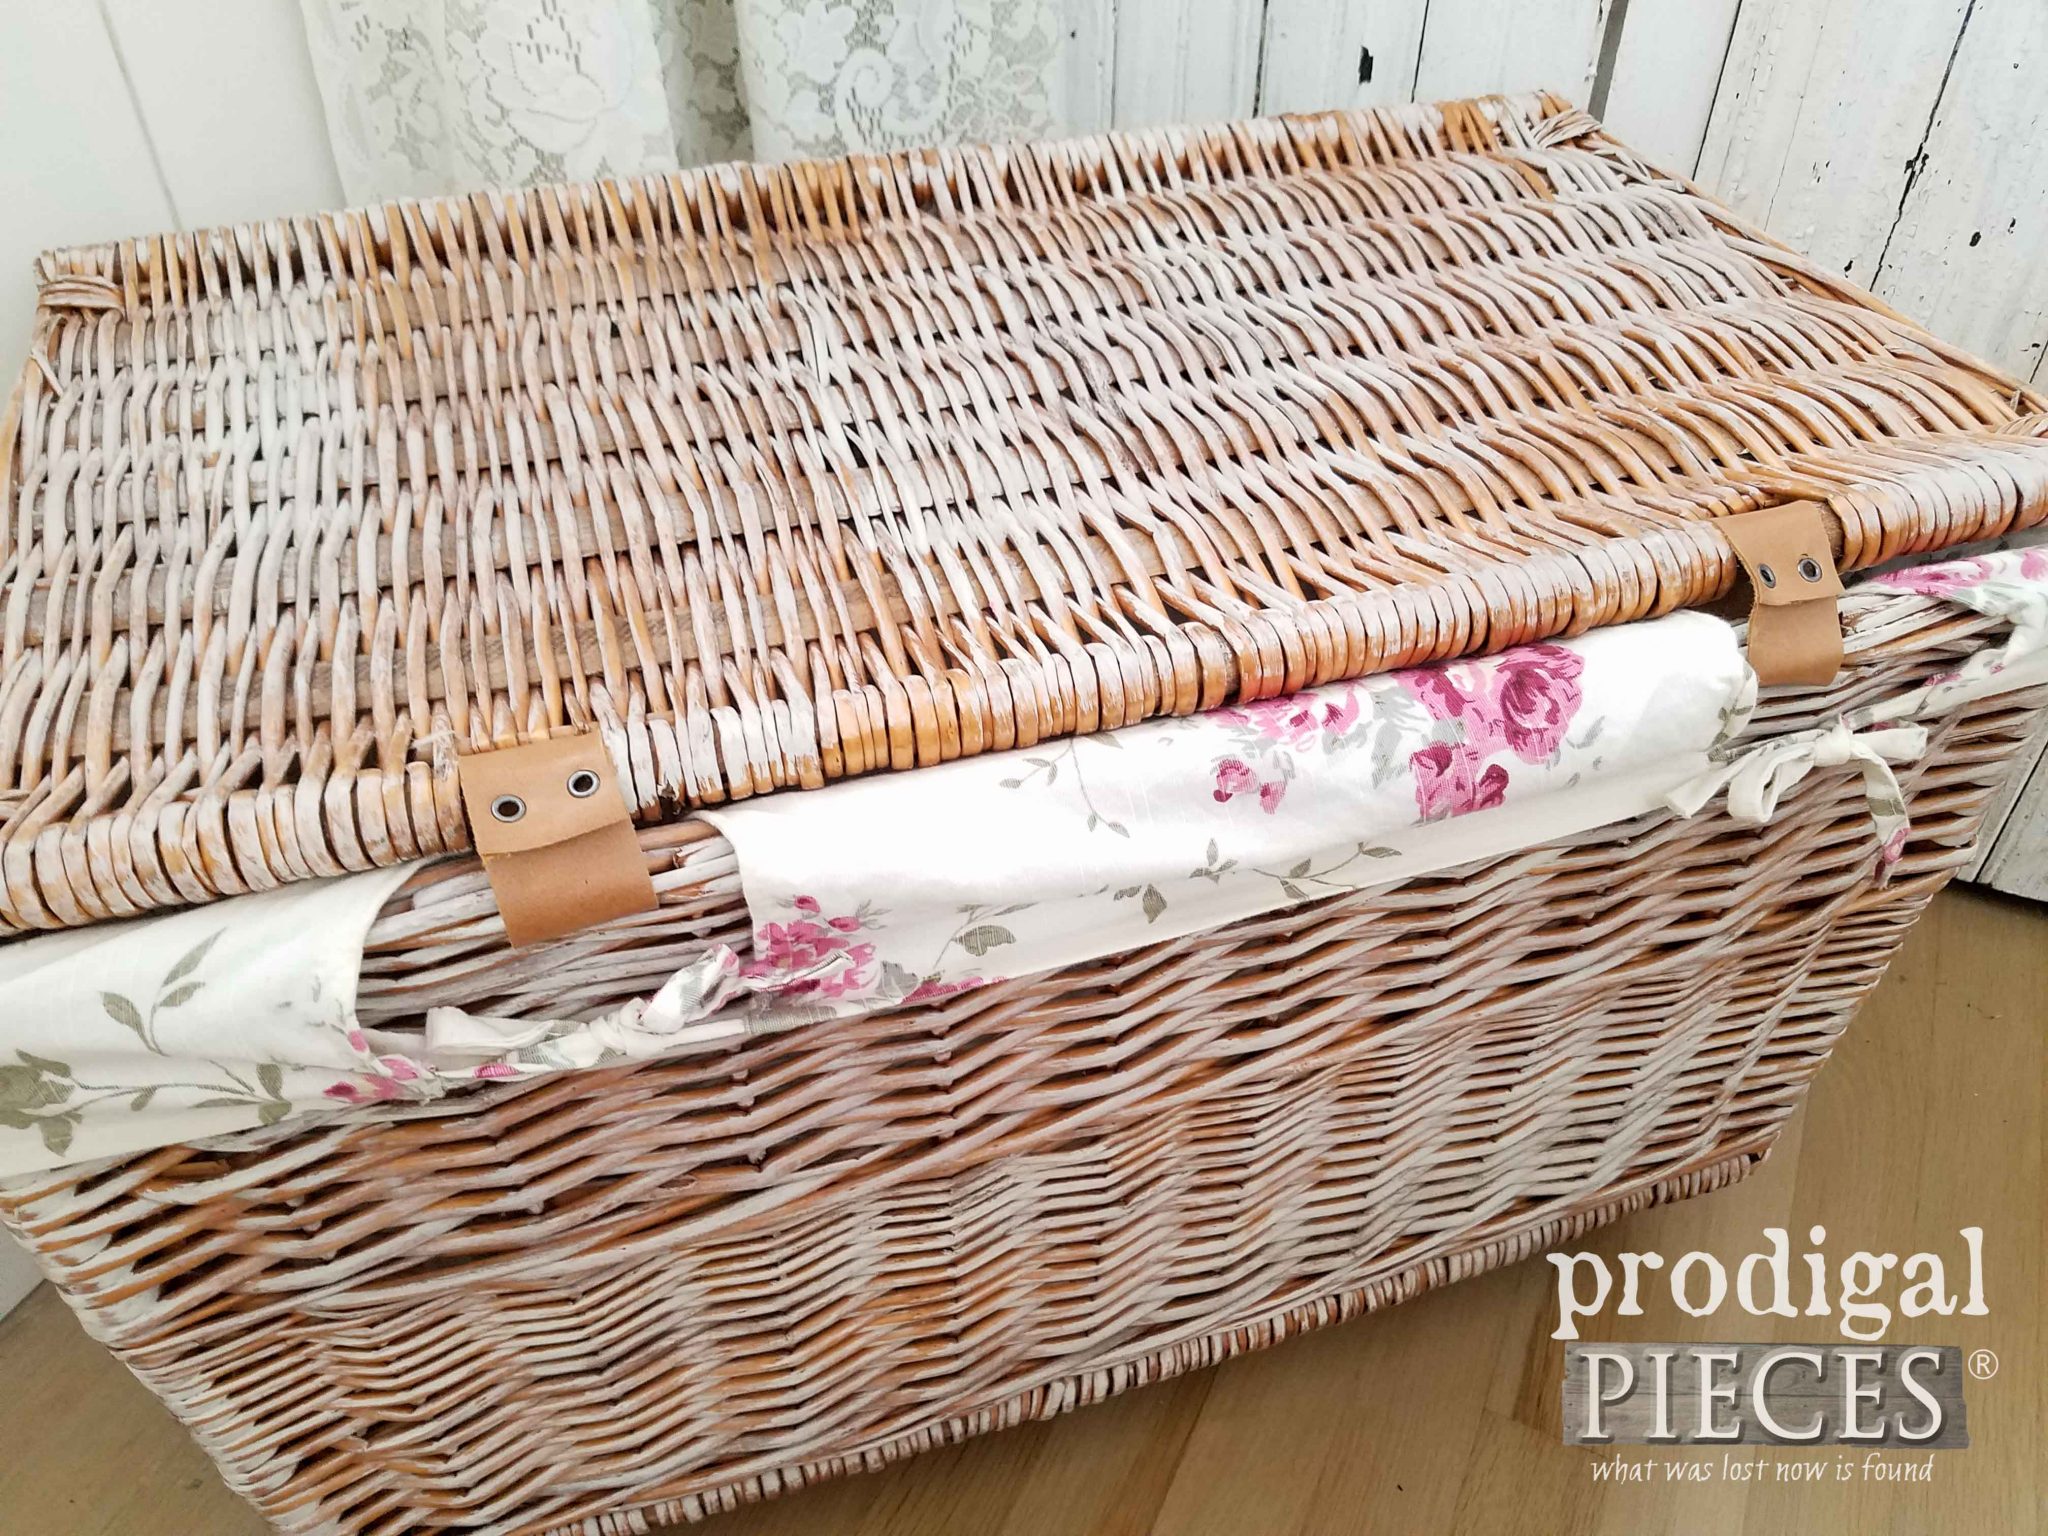 Hinged Laundry Basket with Leather Straps. DIY by Prodigal Pieces | prodigalpieces.com